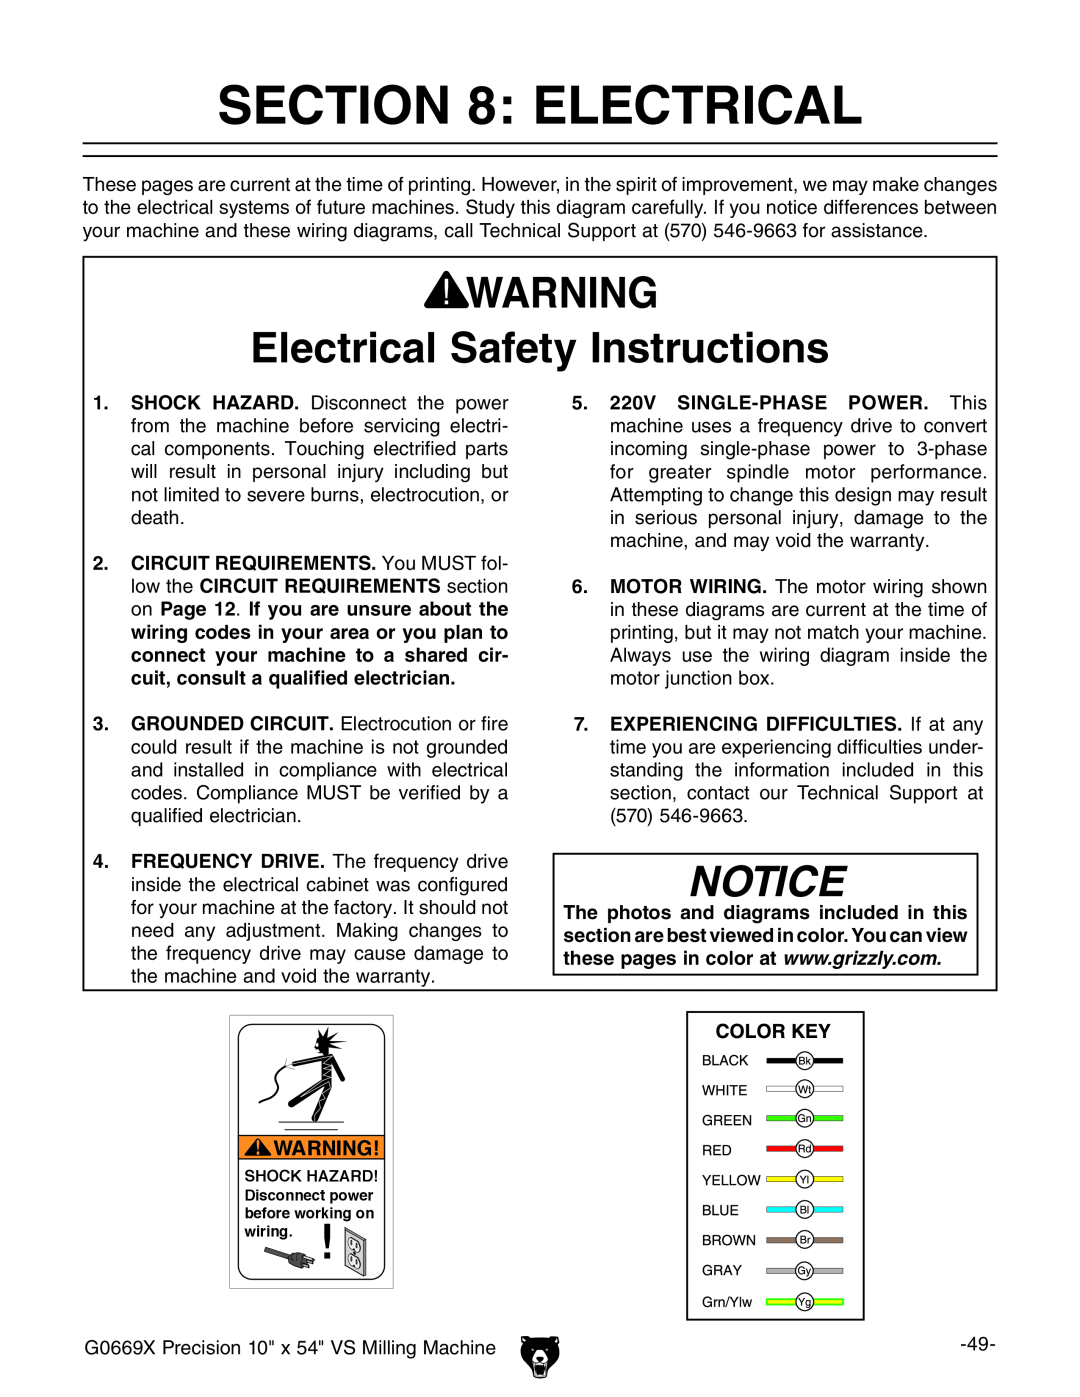 Grizzly g0669X Electrical Safety Instructions, electrical safety, G0669X Precision 10 x 54 VS Milling Machine 